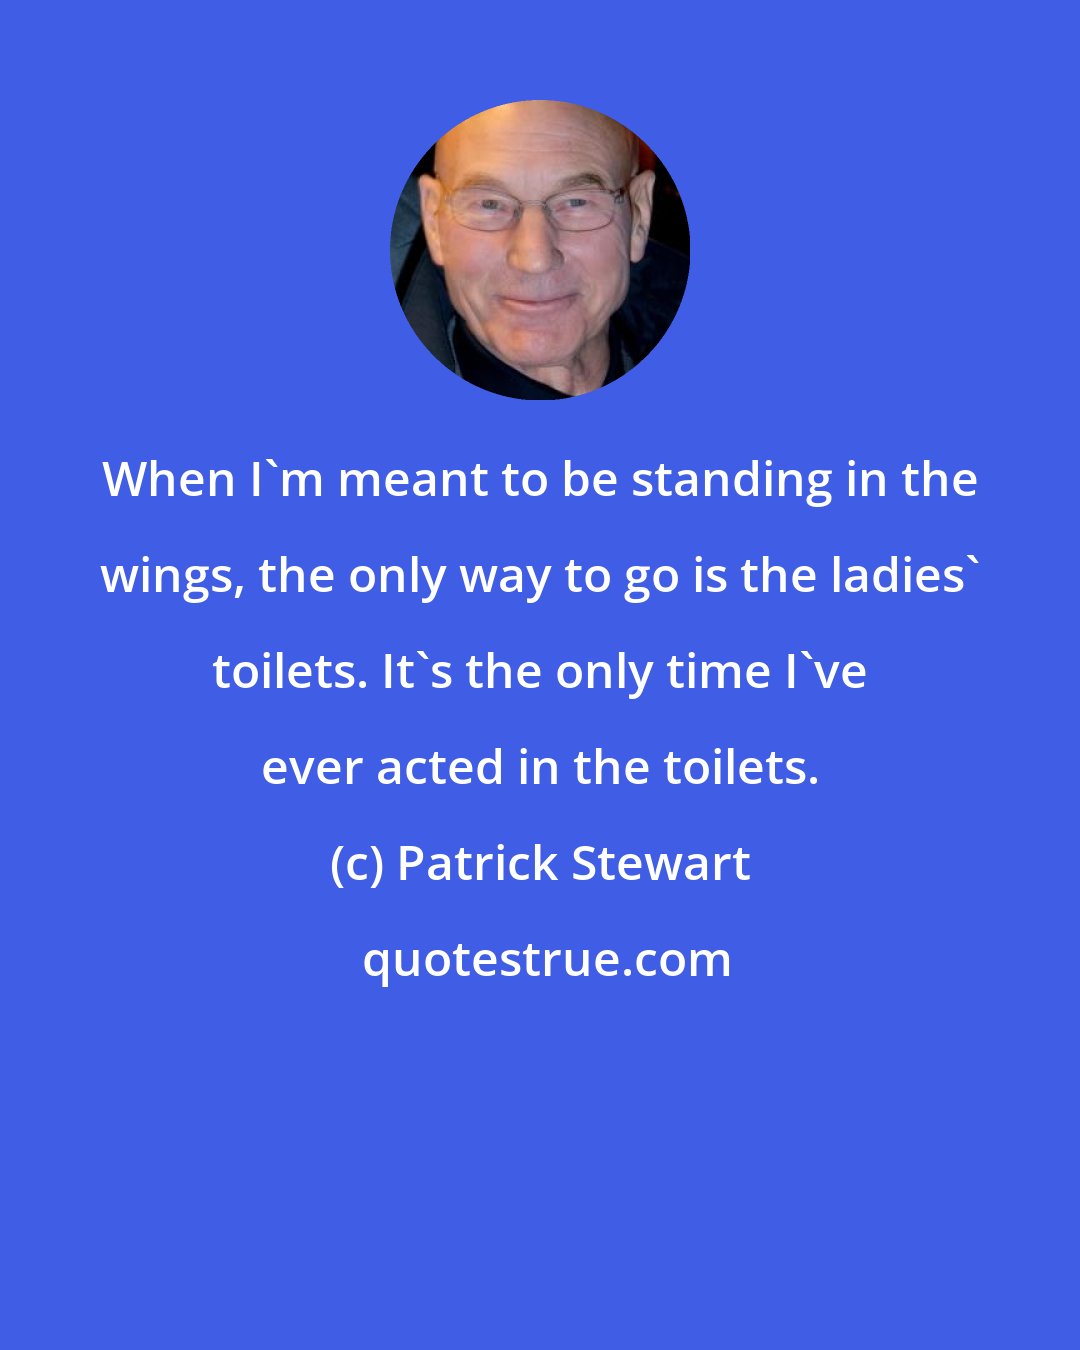 Patrick Stewart: When I'm meant to be standing in the wings, the only way to go is the ladies' toilets. It's the only time I've ever acted in the toilets.